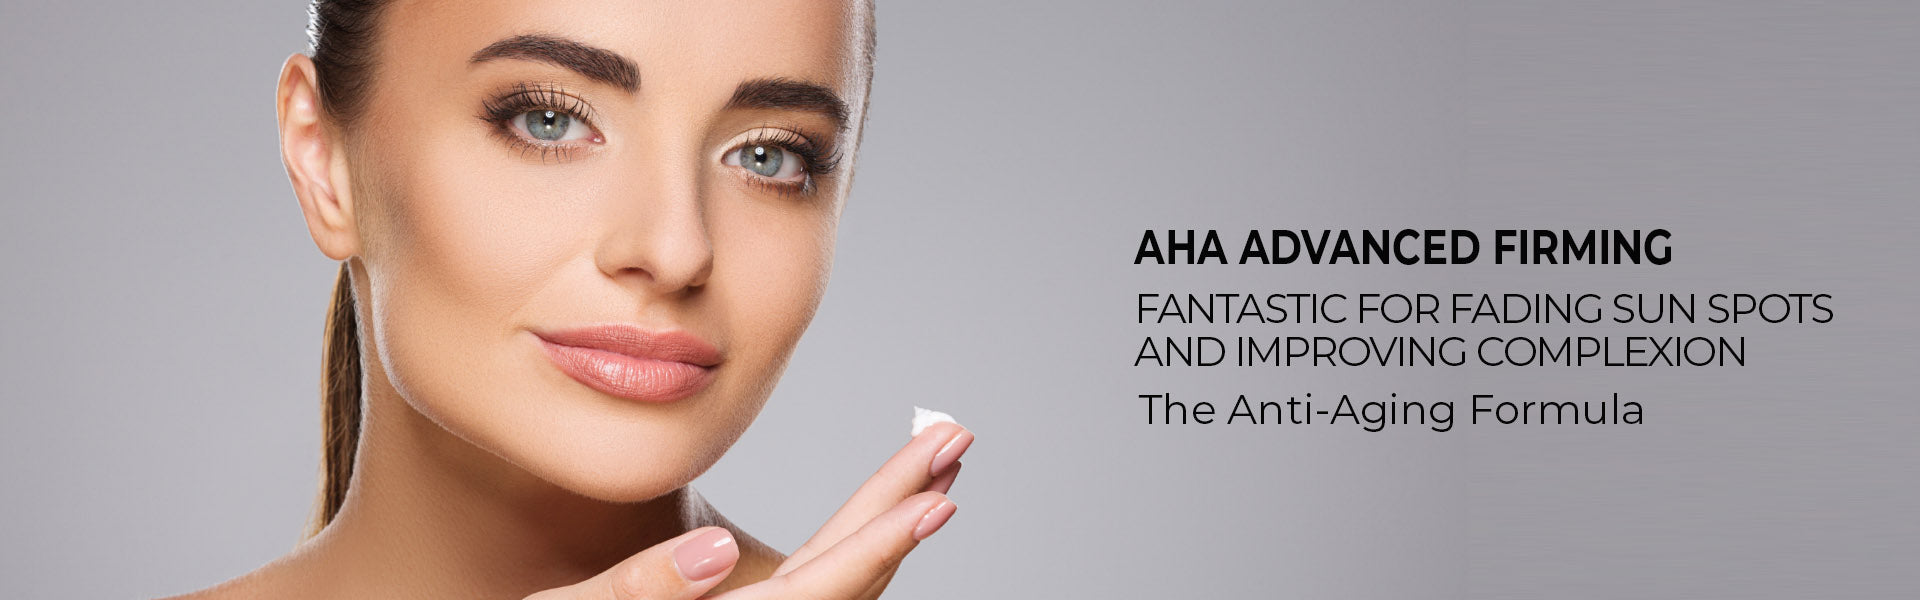 AHA Advanced Firming - Fantastic for fading sun spots and improving complexion